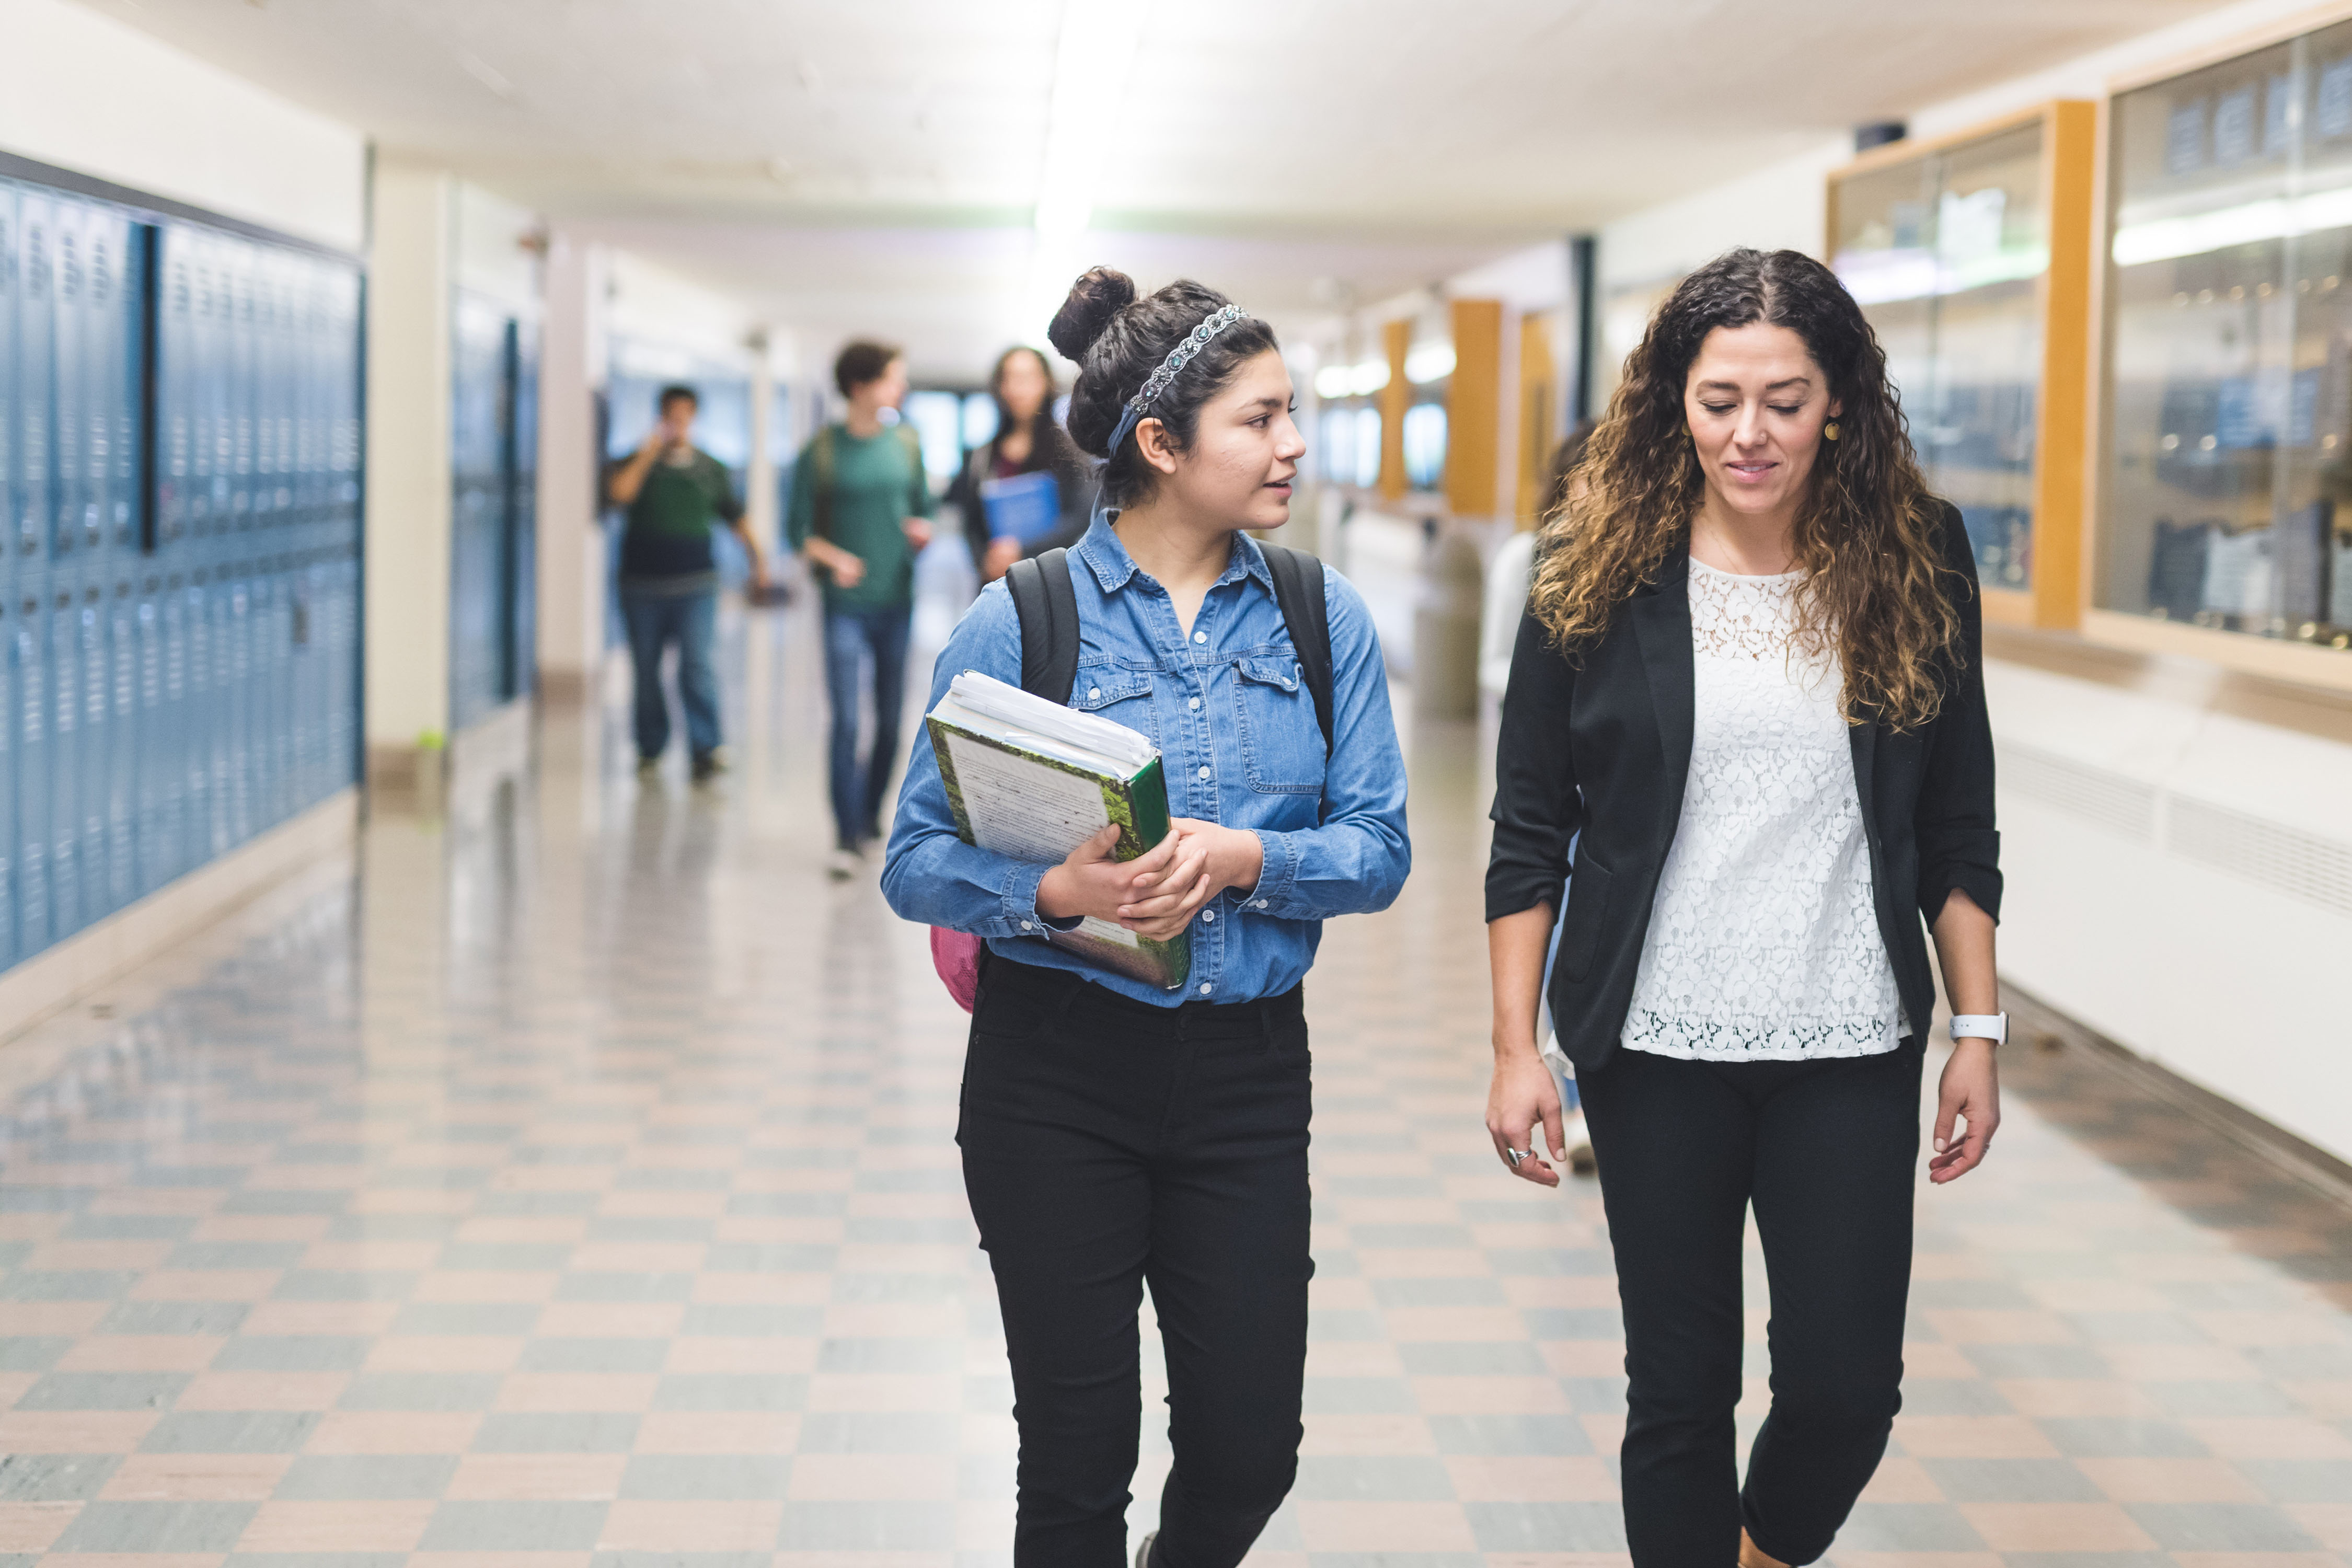 If the responsibilities of a teacher go far beyond academics, why isn’t that what we are testing teacher candidates on? writes Olivia Singer, a master's student in the teacher preparation program. (Getty Images)